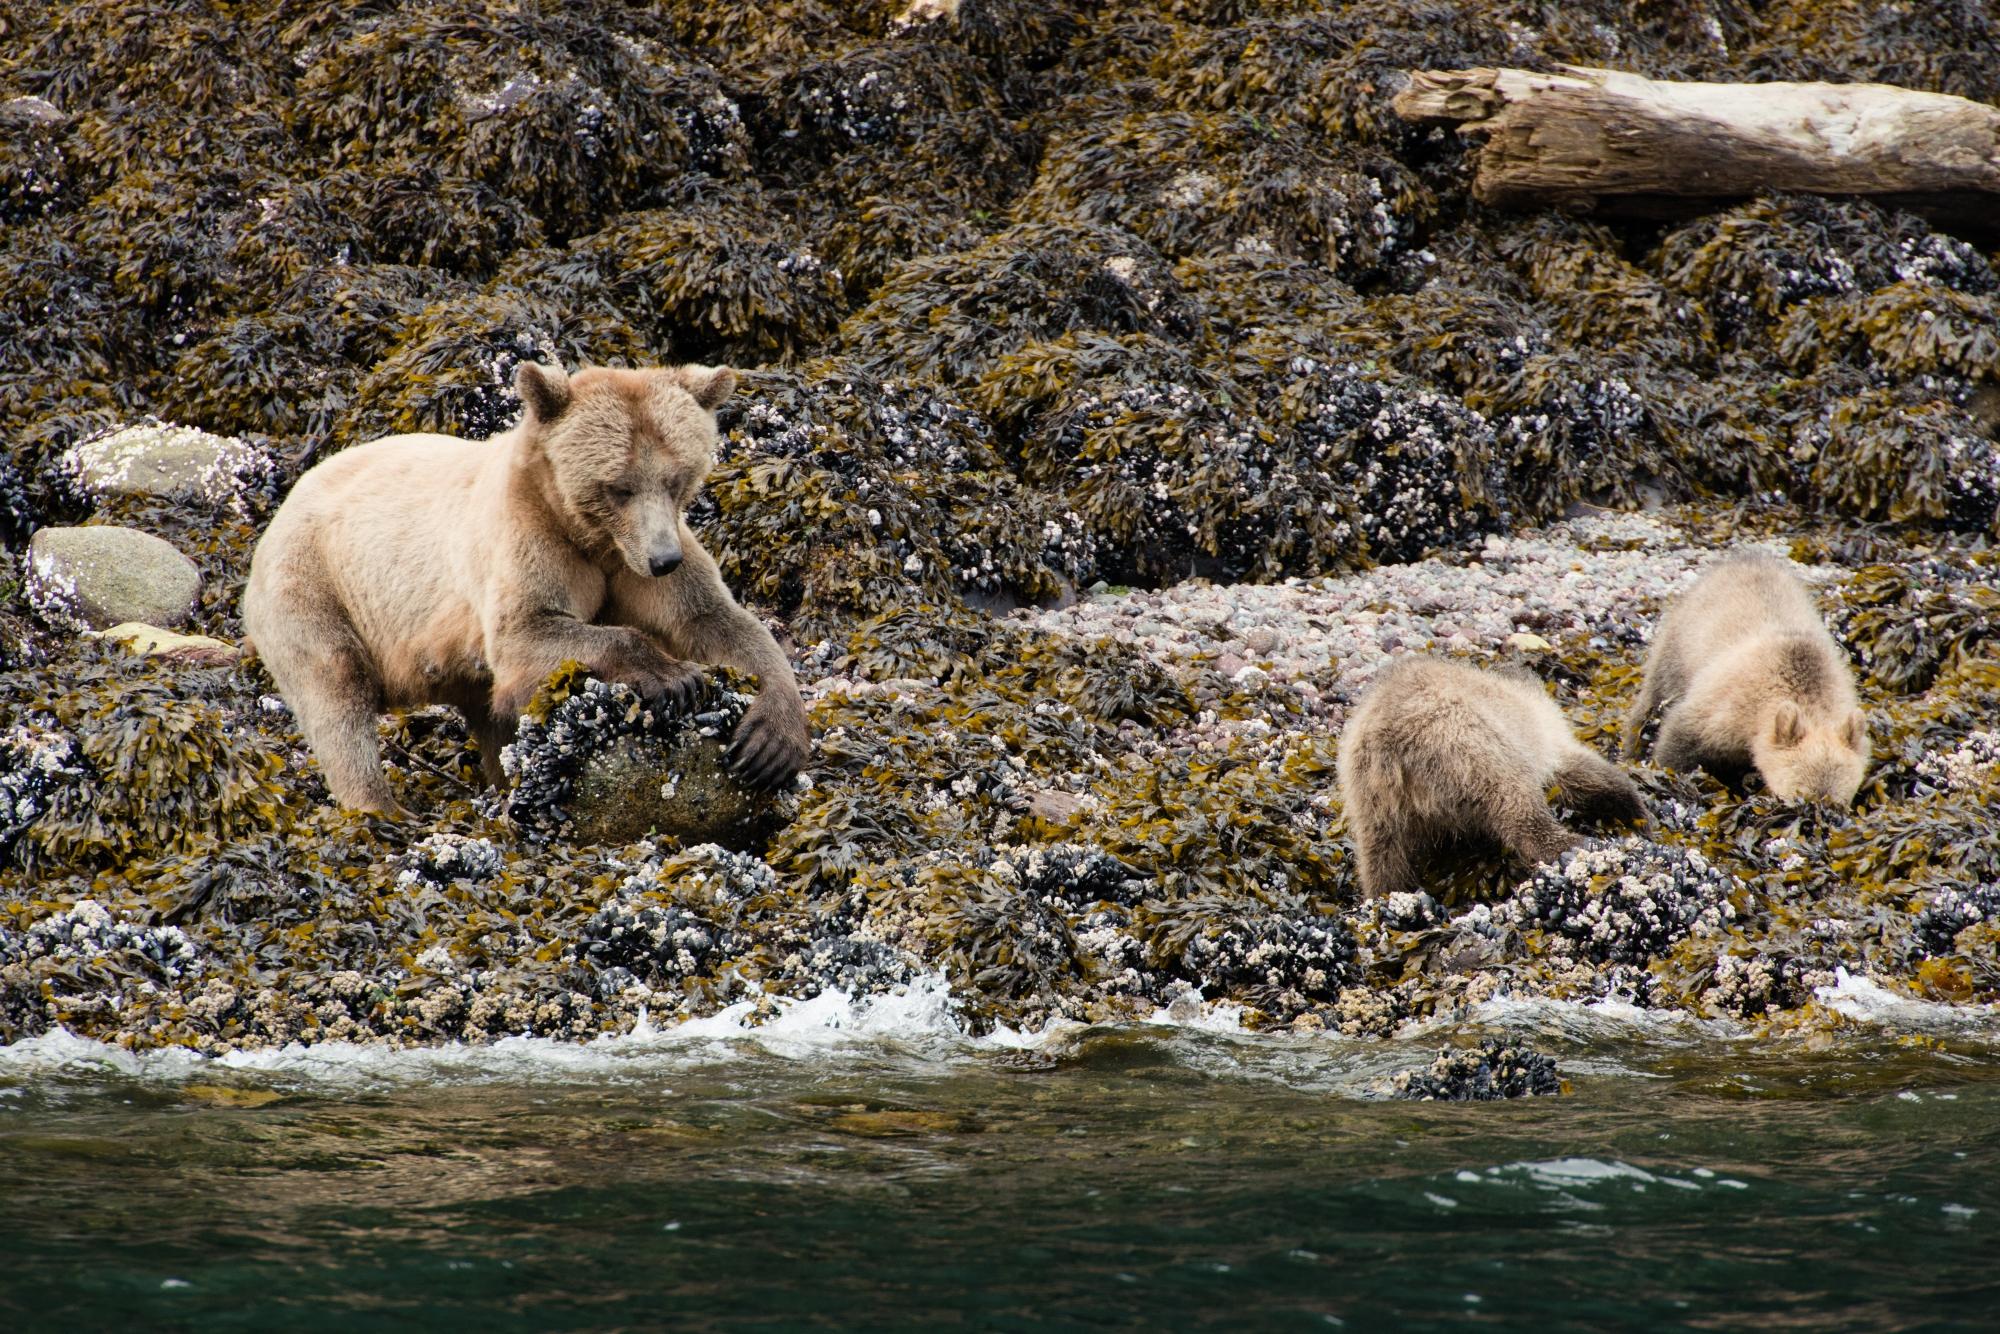 Young grizzly bears forage along the rocky shoreline